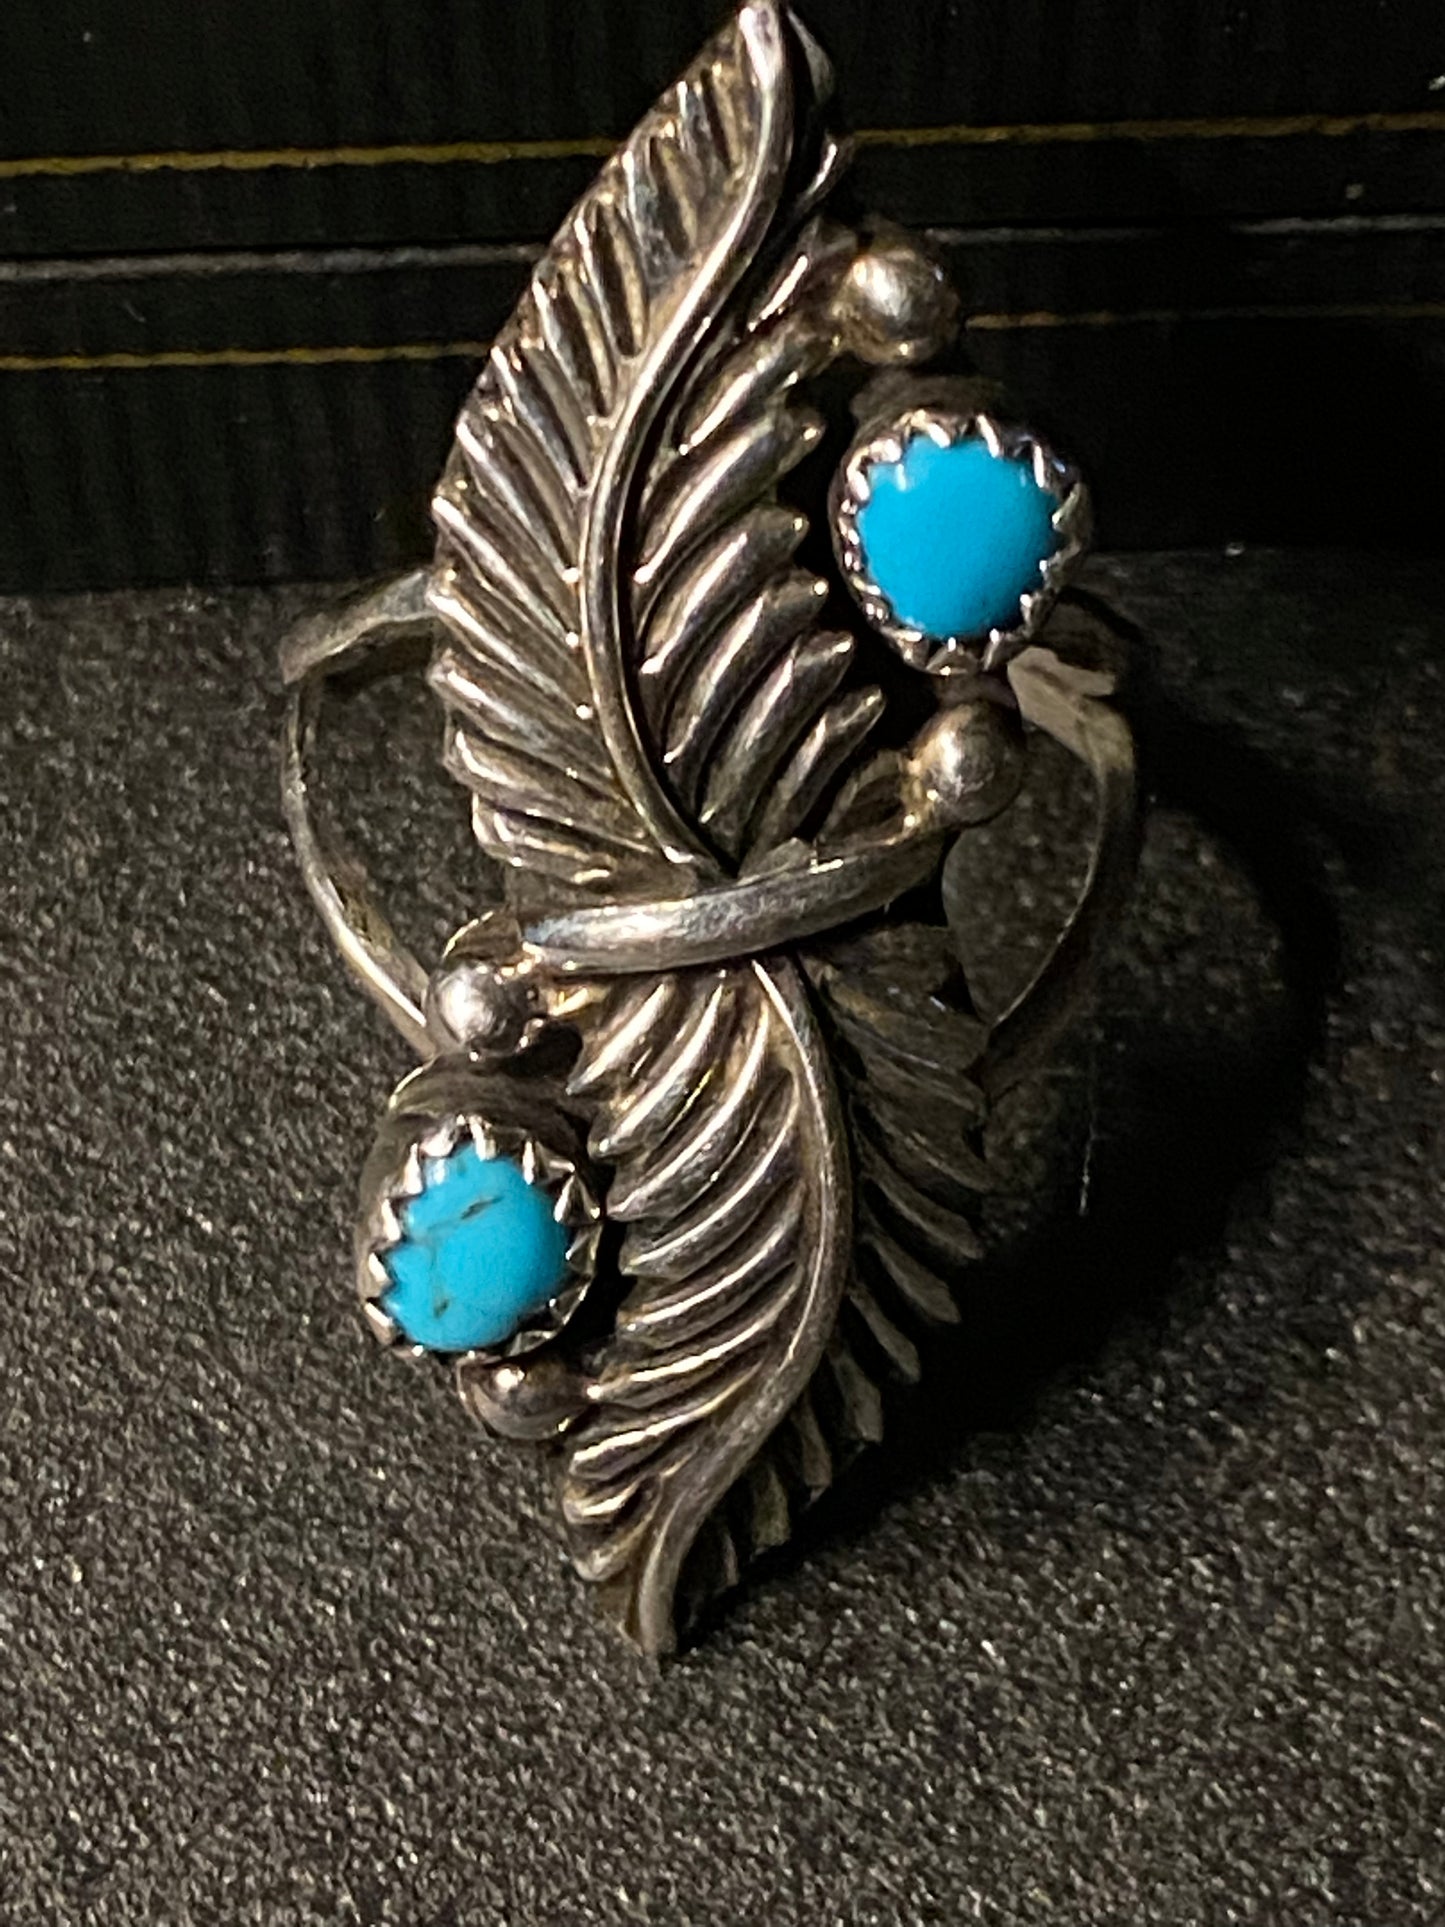 AMAZING VINTAGE NAVAJO STERLING SILVER NATIVE AMERICAN TURQUOISE RING.